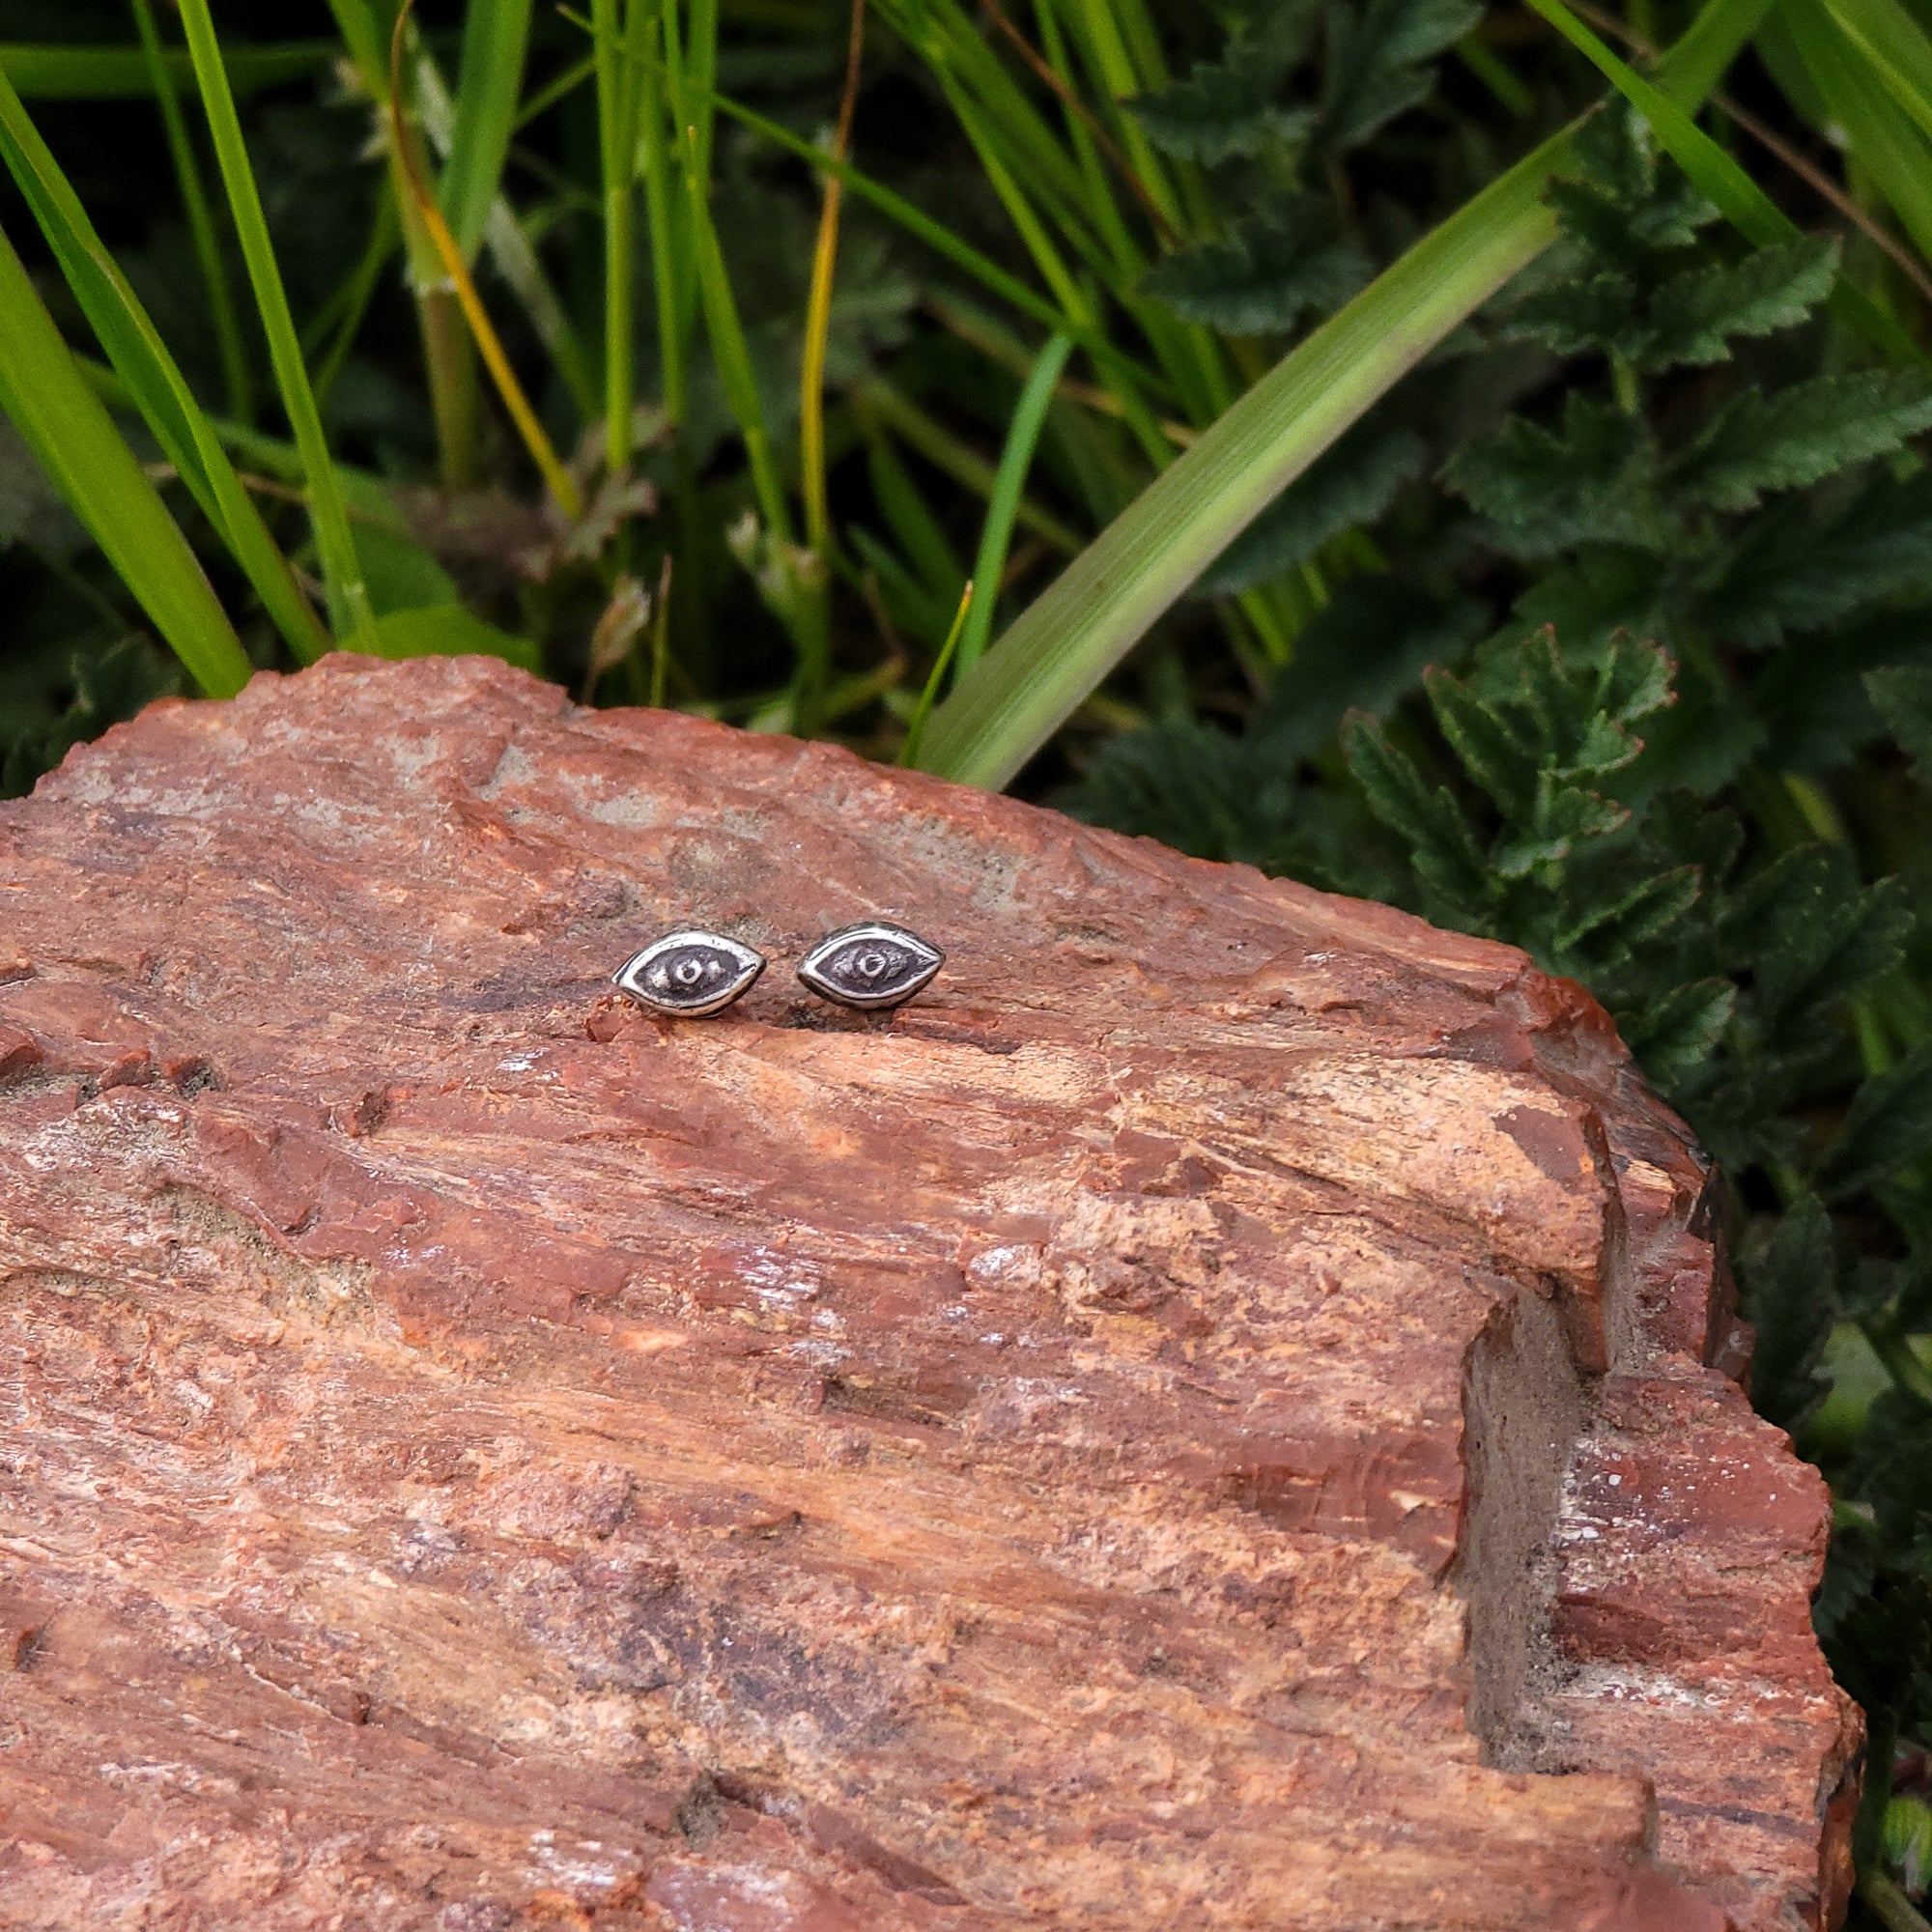 Pictured are a pair of handmade sterling silver stud earrings are designed in the shape of eyes. Placed on a wooden surface with a backdrop of green leaves, they make a statement with their unique design. Perfect for anyone who loves unique jewelry.